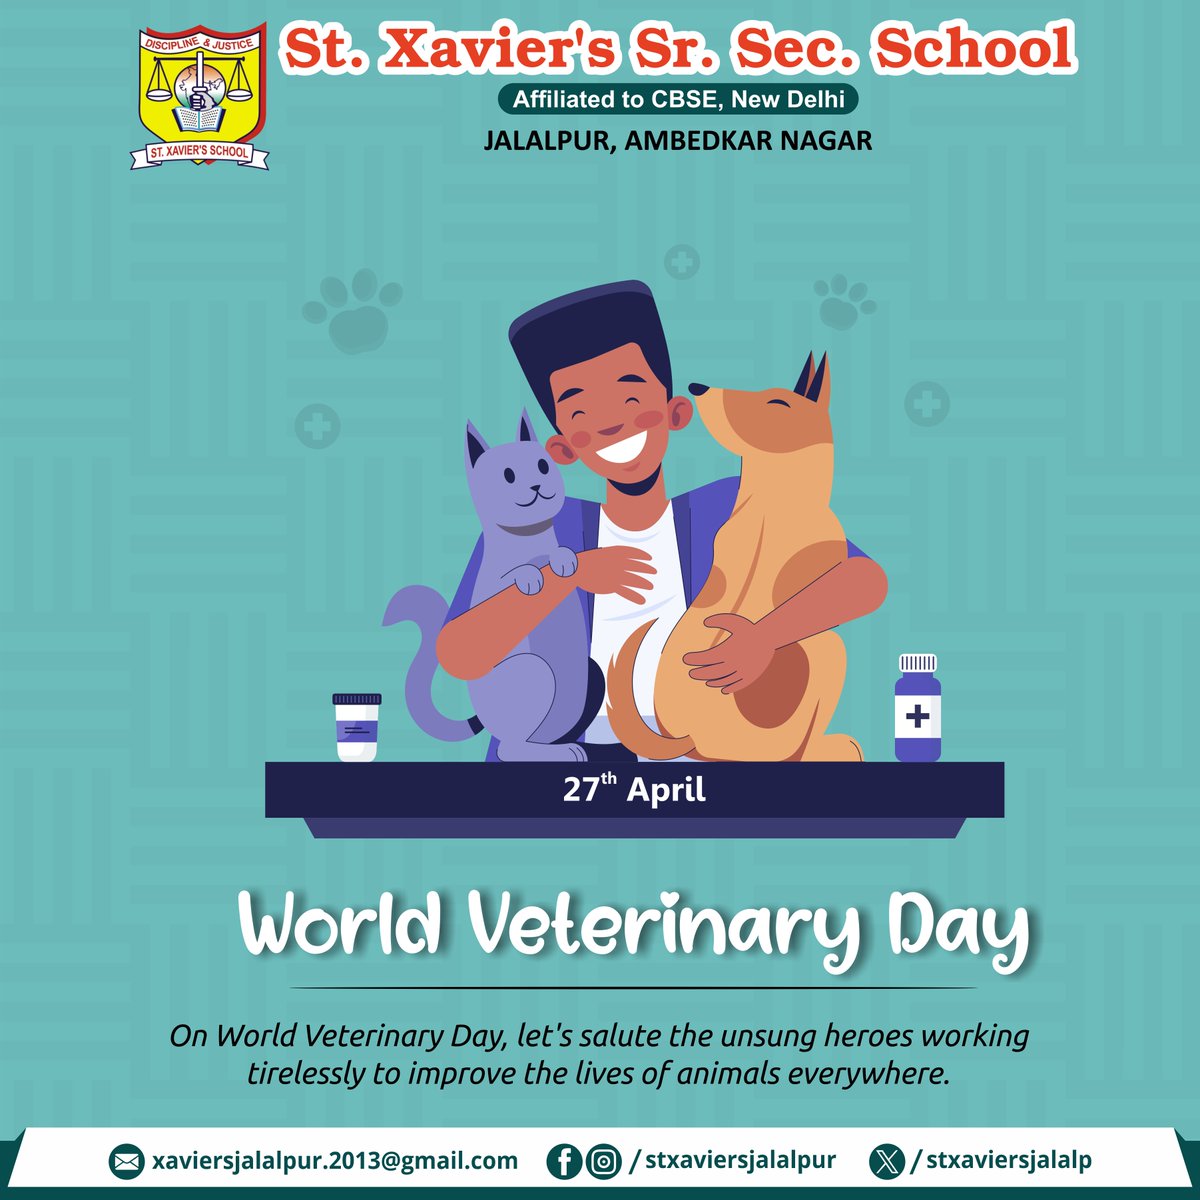 Happy World Veterinary Day! Let's appreciate the incredible work of veterinarians in ensuring the health and happiness of animals.

#WorldVeterinaryDay #VeterinaryDay #AnimalHealth #AnimalDoctors #Veterinarian #AnimalClinic